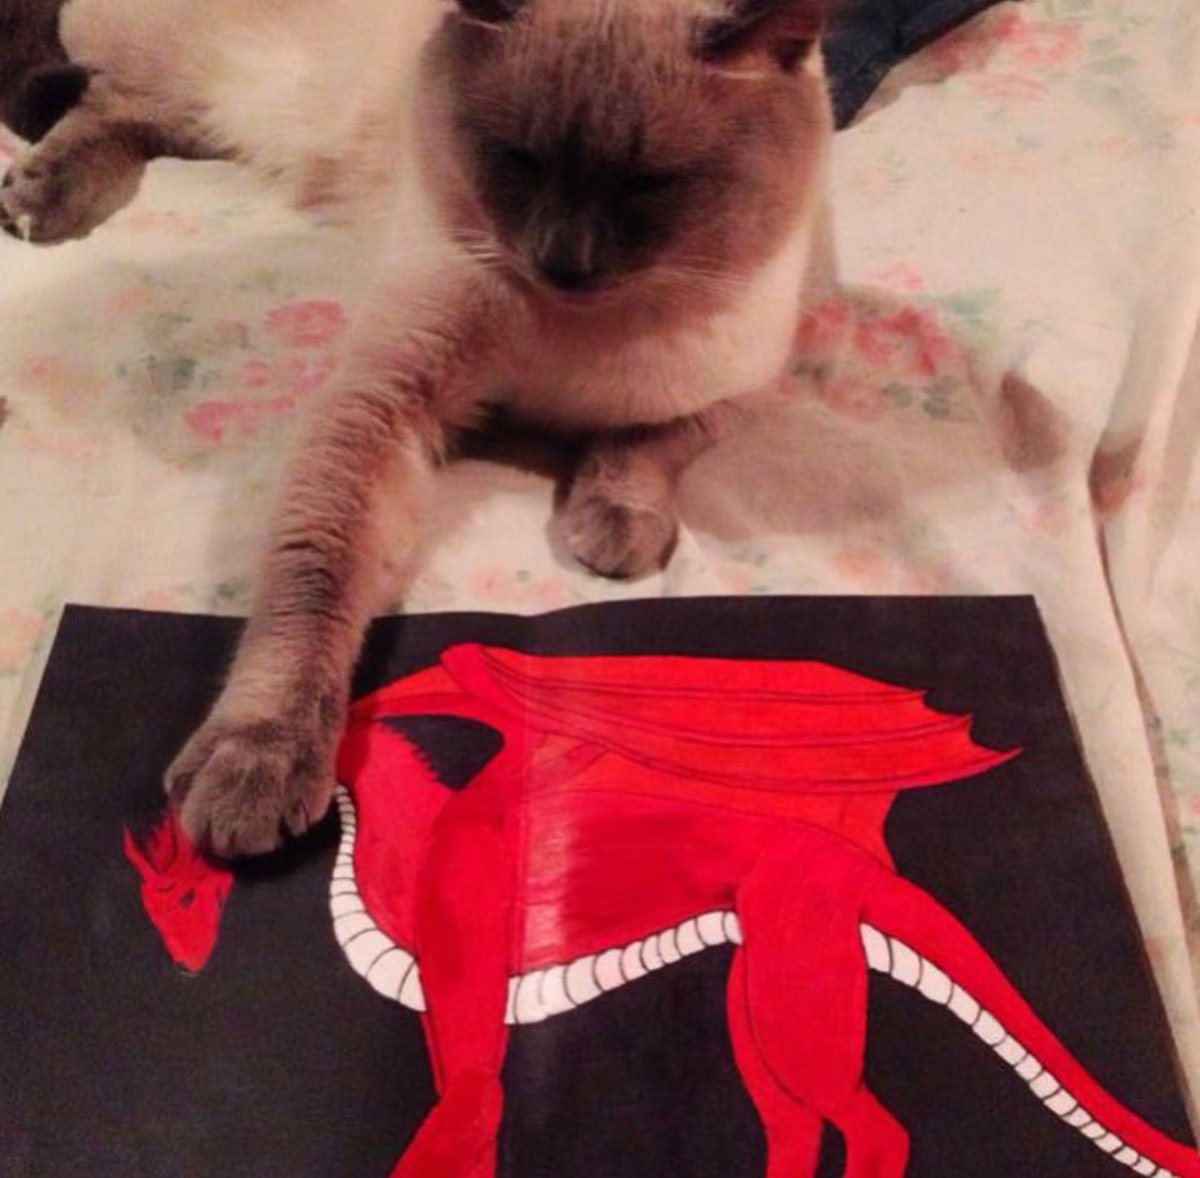 Once upon a time I was really good at drawing...and once upon a time I had a beautiful & sweet Siamese who claimed most of my drawings 😂. I miss my Snowball so much ❤️❤️💔. #snowball #siamesebaby #siameseangel #dragonart #permanentmarkerart